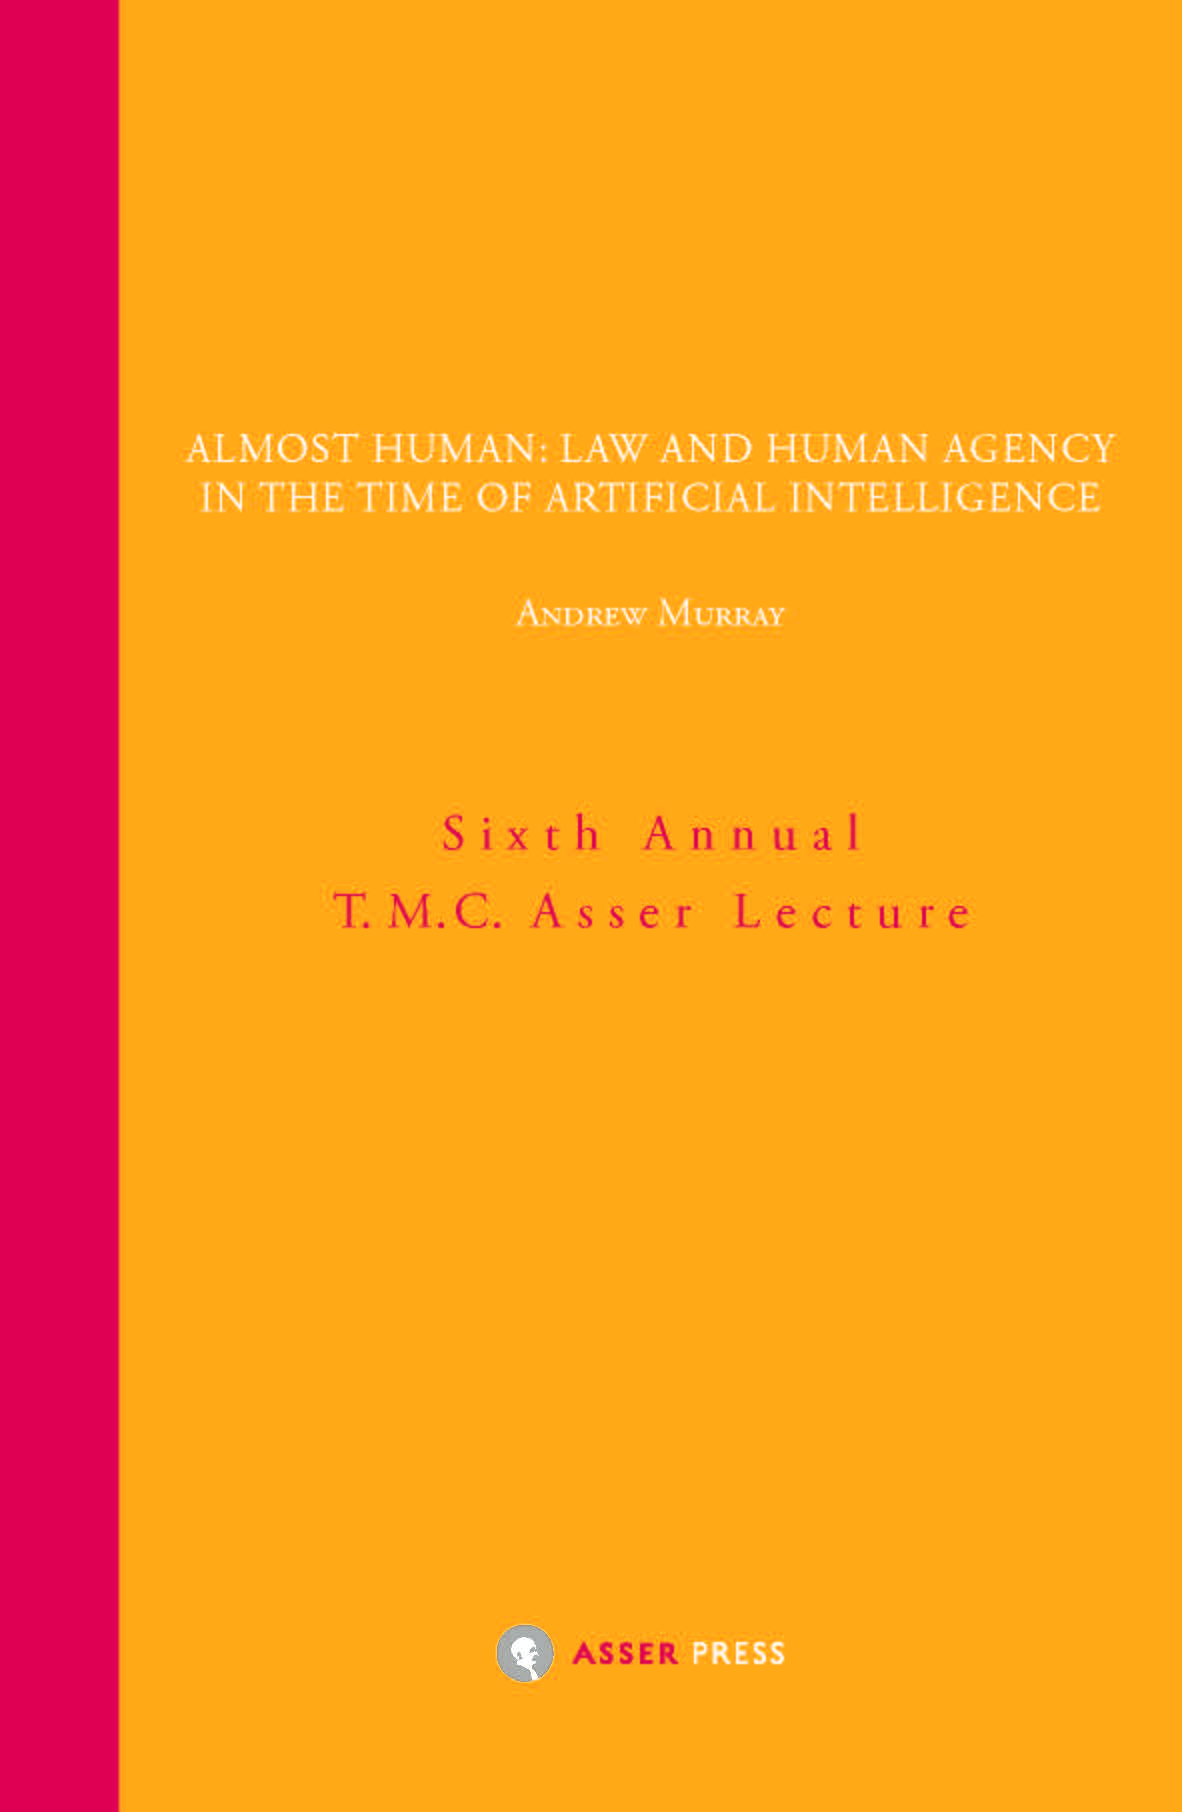 Almost Human: Law and Human Agency in the Time of Artificial Intelligence - Sixth Annual T.M.C. Asser Lecture